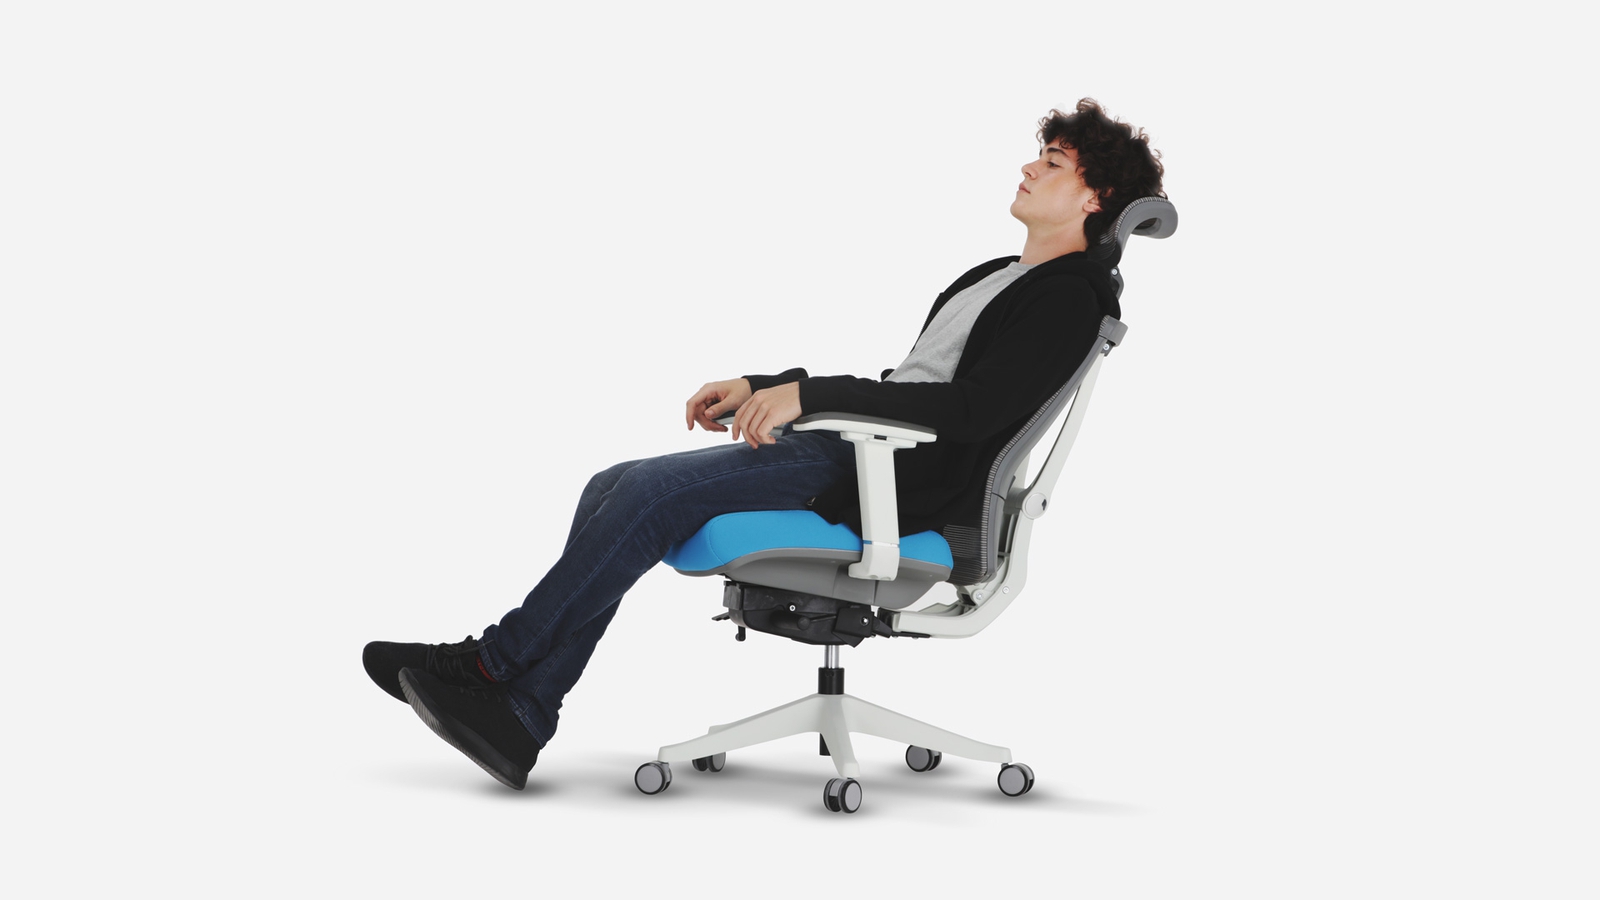 15 Best Ergonomic Chair Designs for Work and Home Office